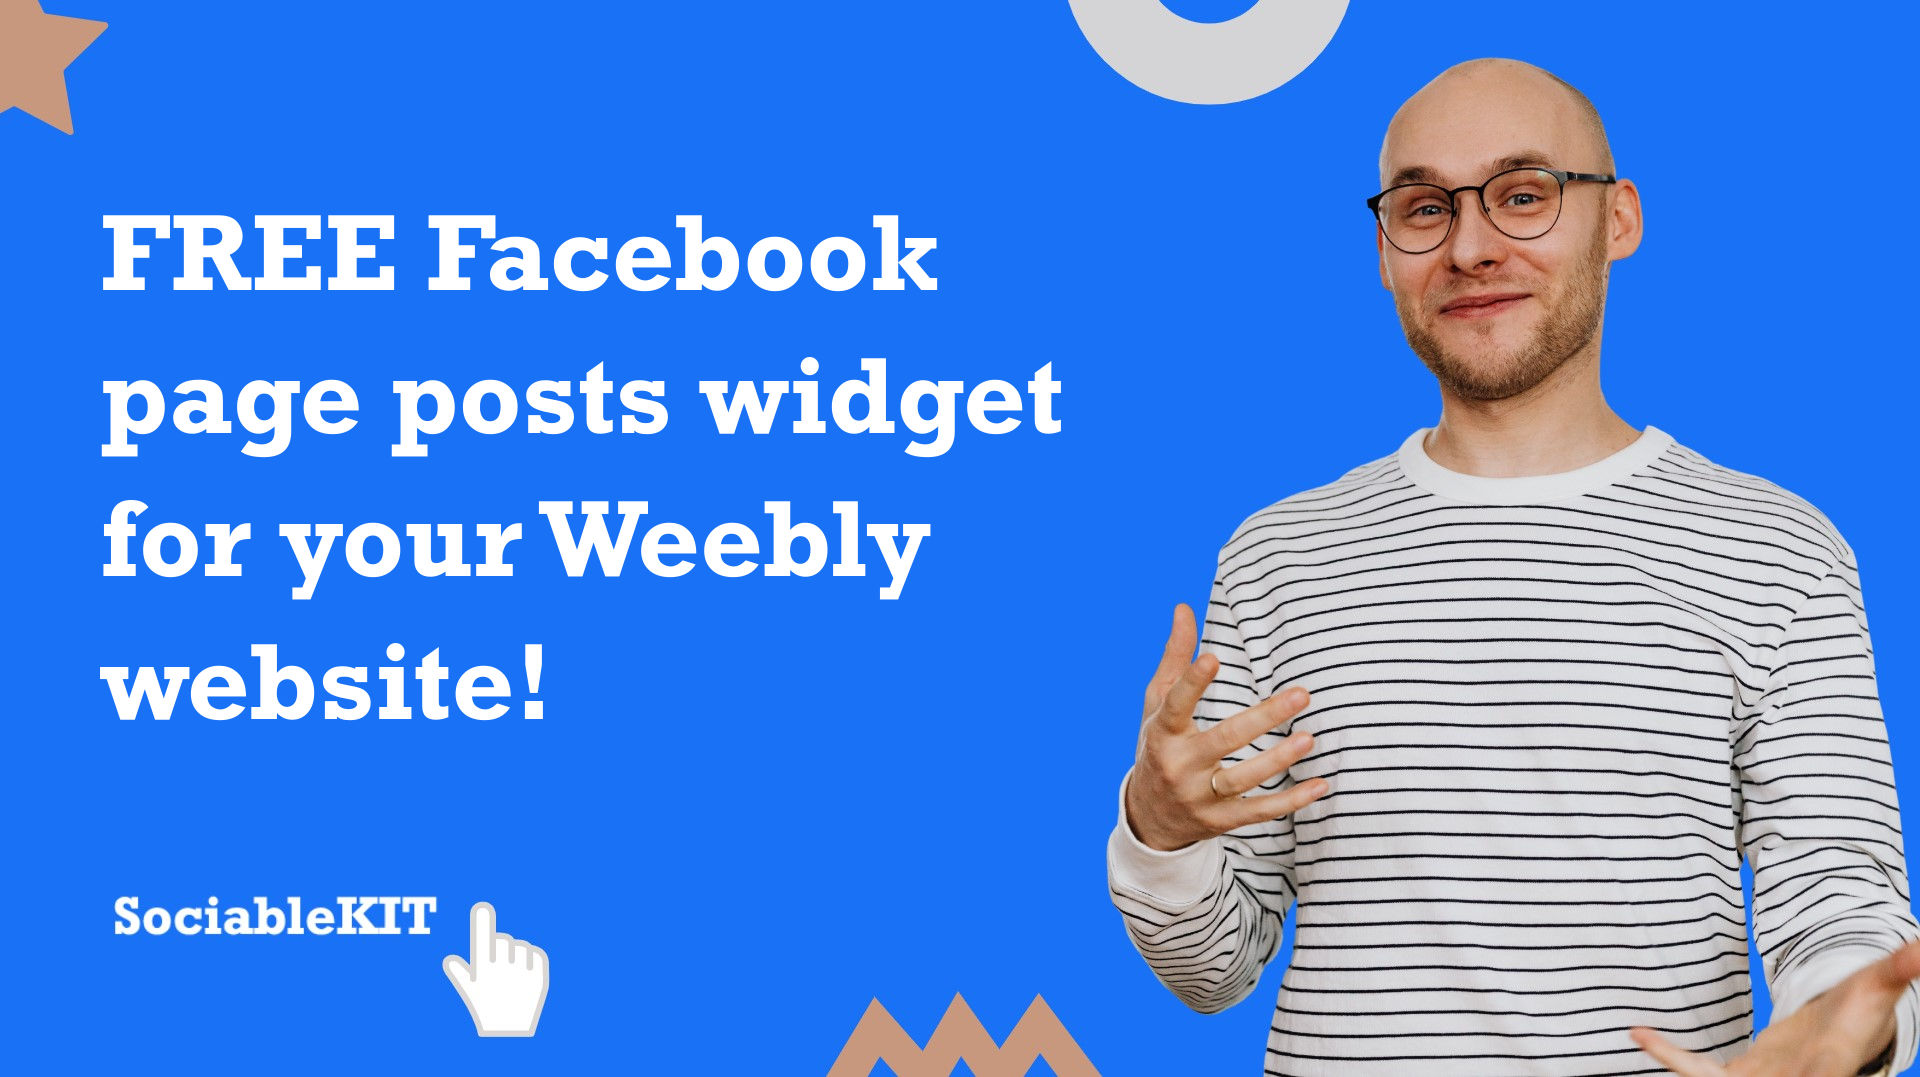 Free Facebook page posts widget for your Weebly website